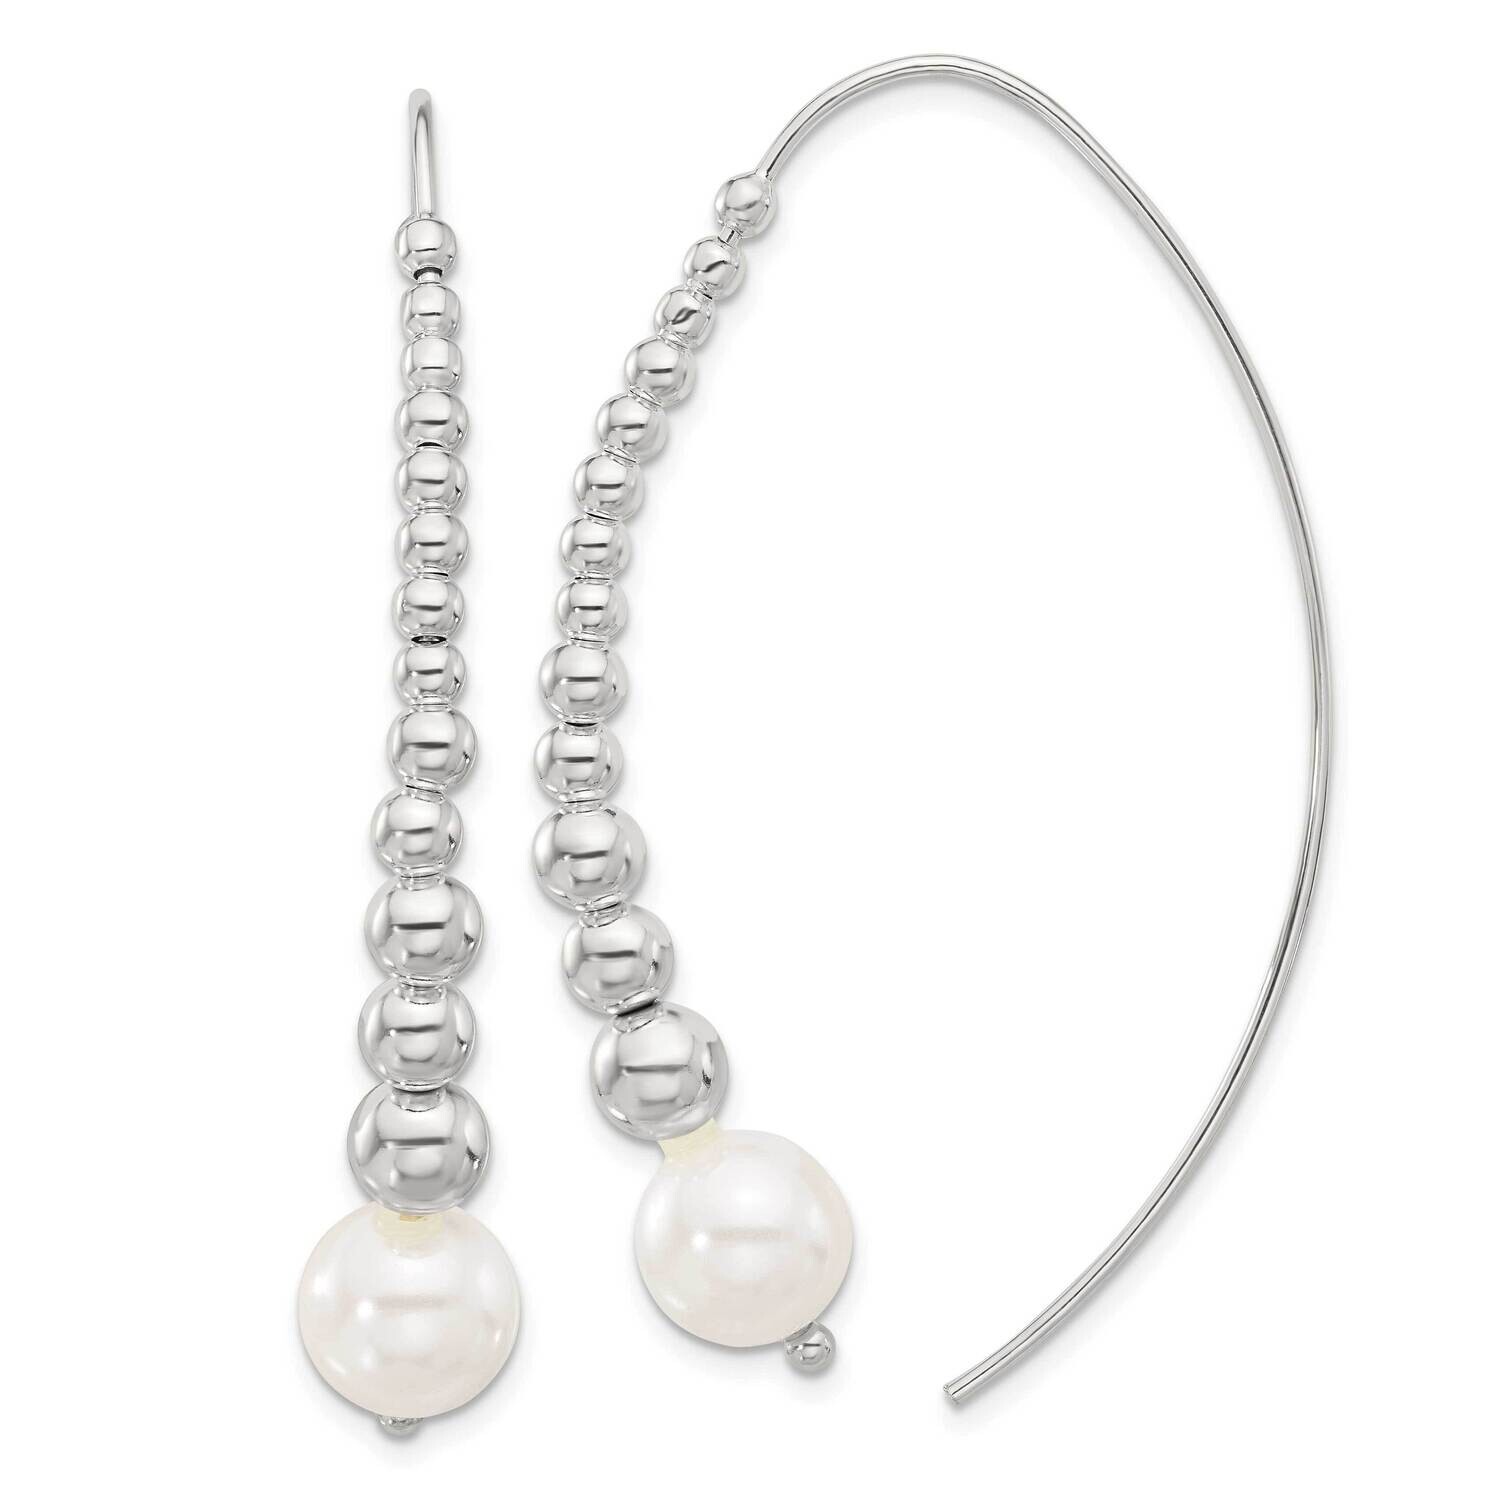 Beaded Simulated Pearl Threader Earrings Sterling Silver Polished QE17057